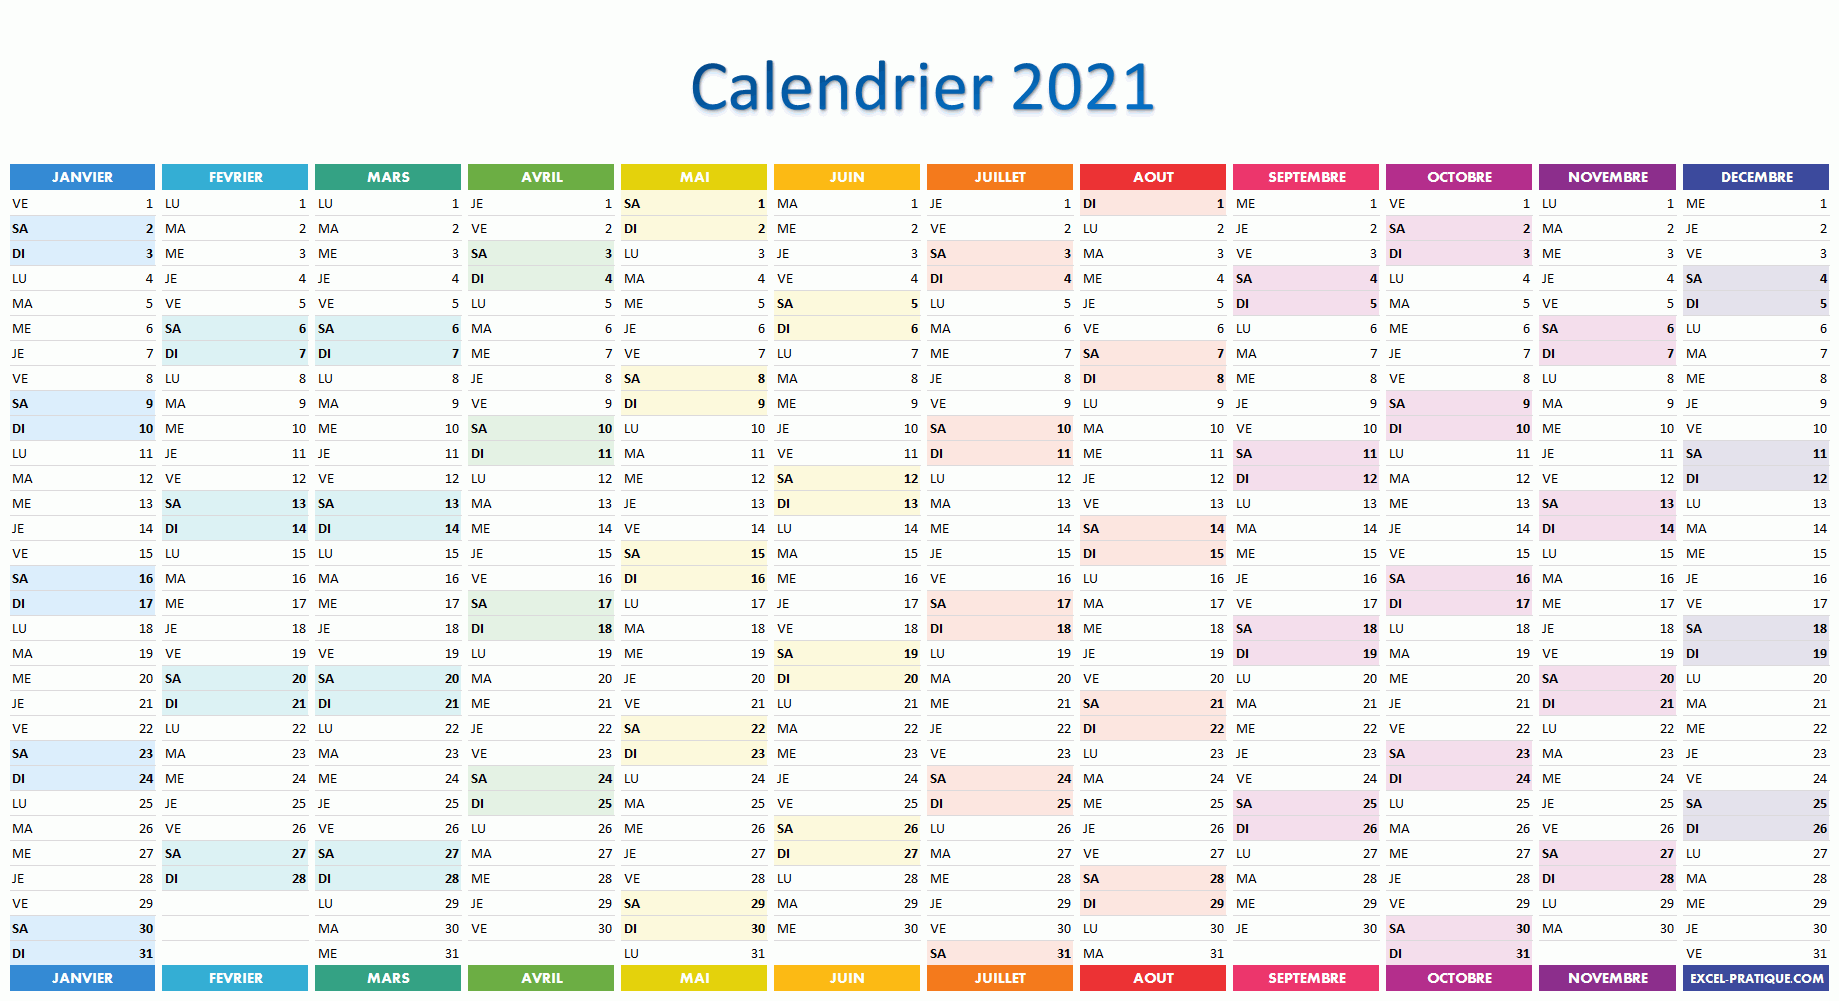 Image Calendrier 2021 Calendrier 2021 simple